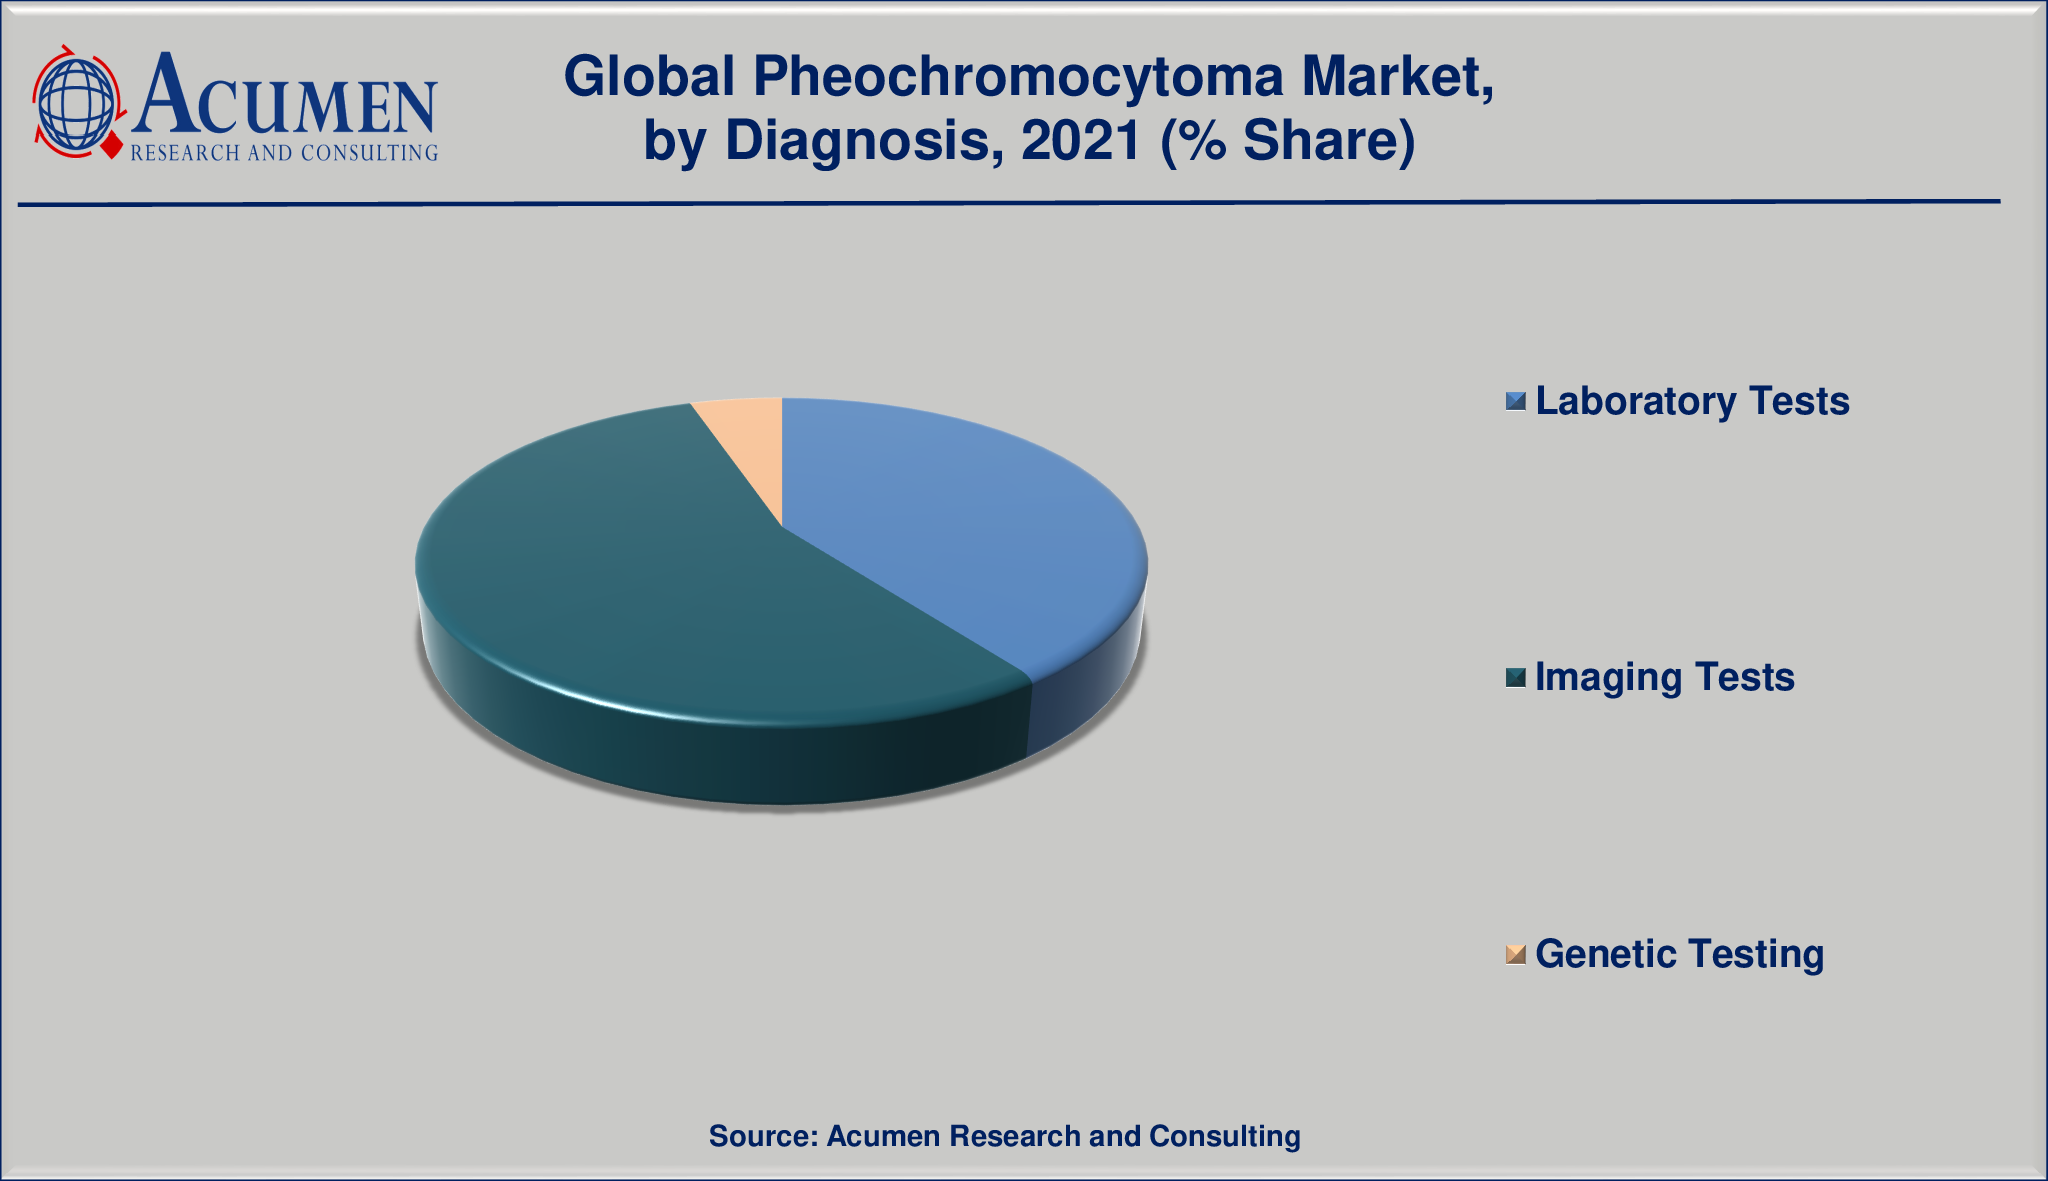 Pheochromocytoma Market By Diagnossis will achieve a market size of USD 4,246 Million by 2030, budding at a CAGR of 4.2%